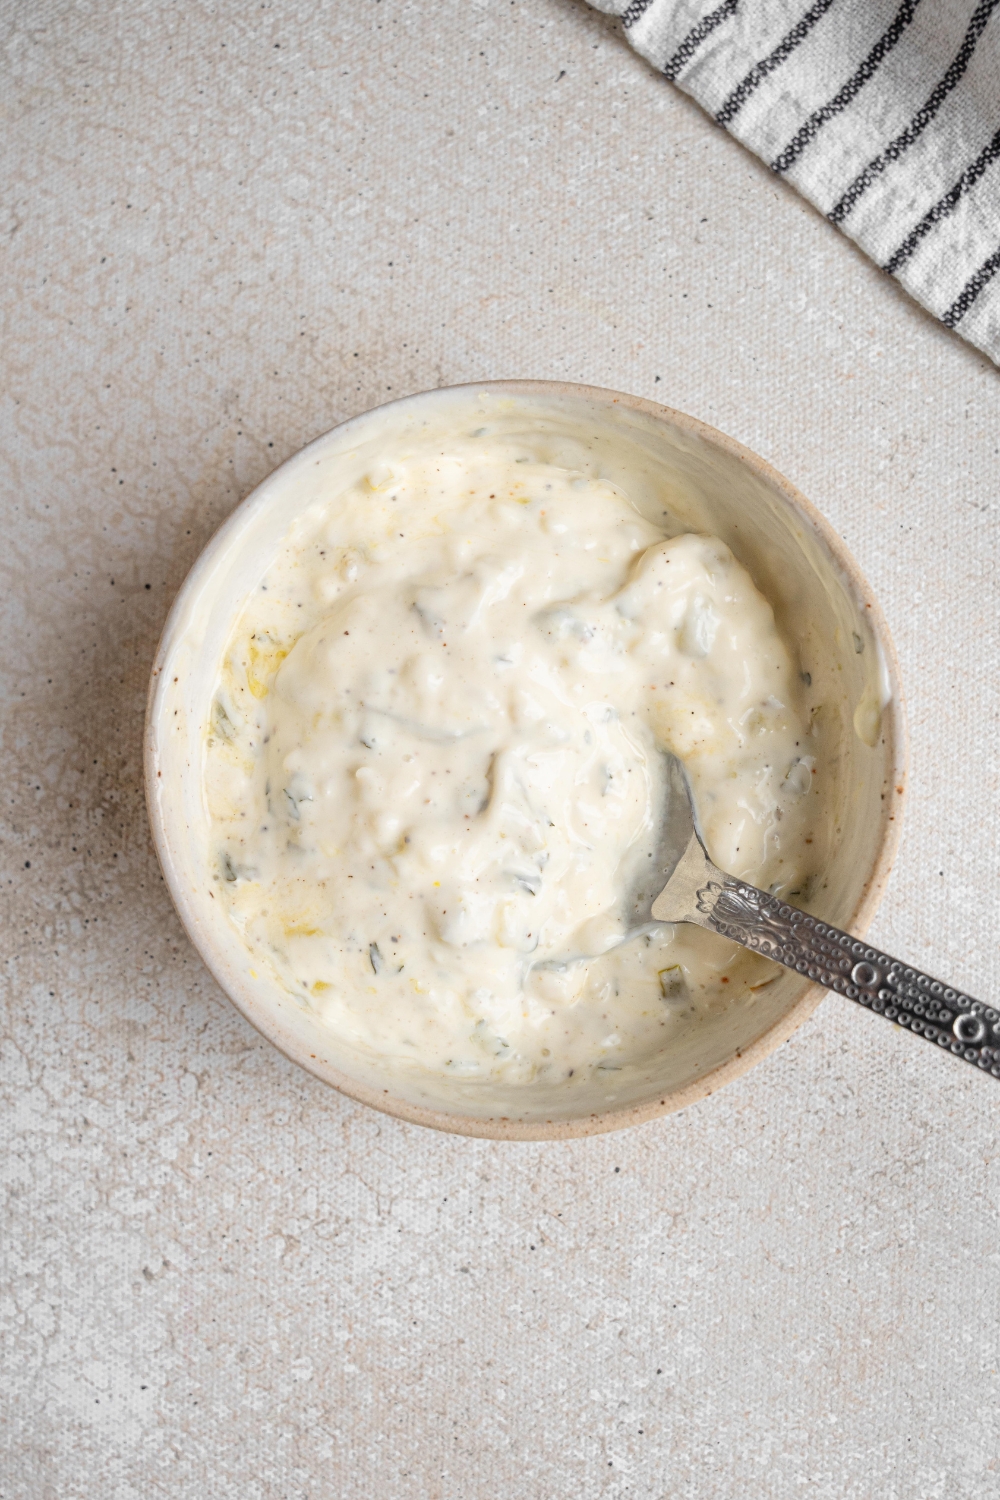 A small bowl holds chunky garlic aioli. A spoon rests in the aioli as well.